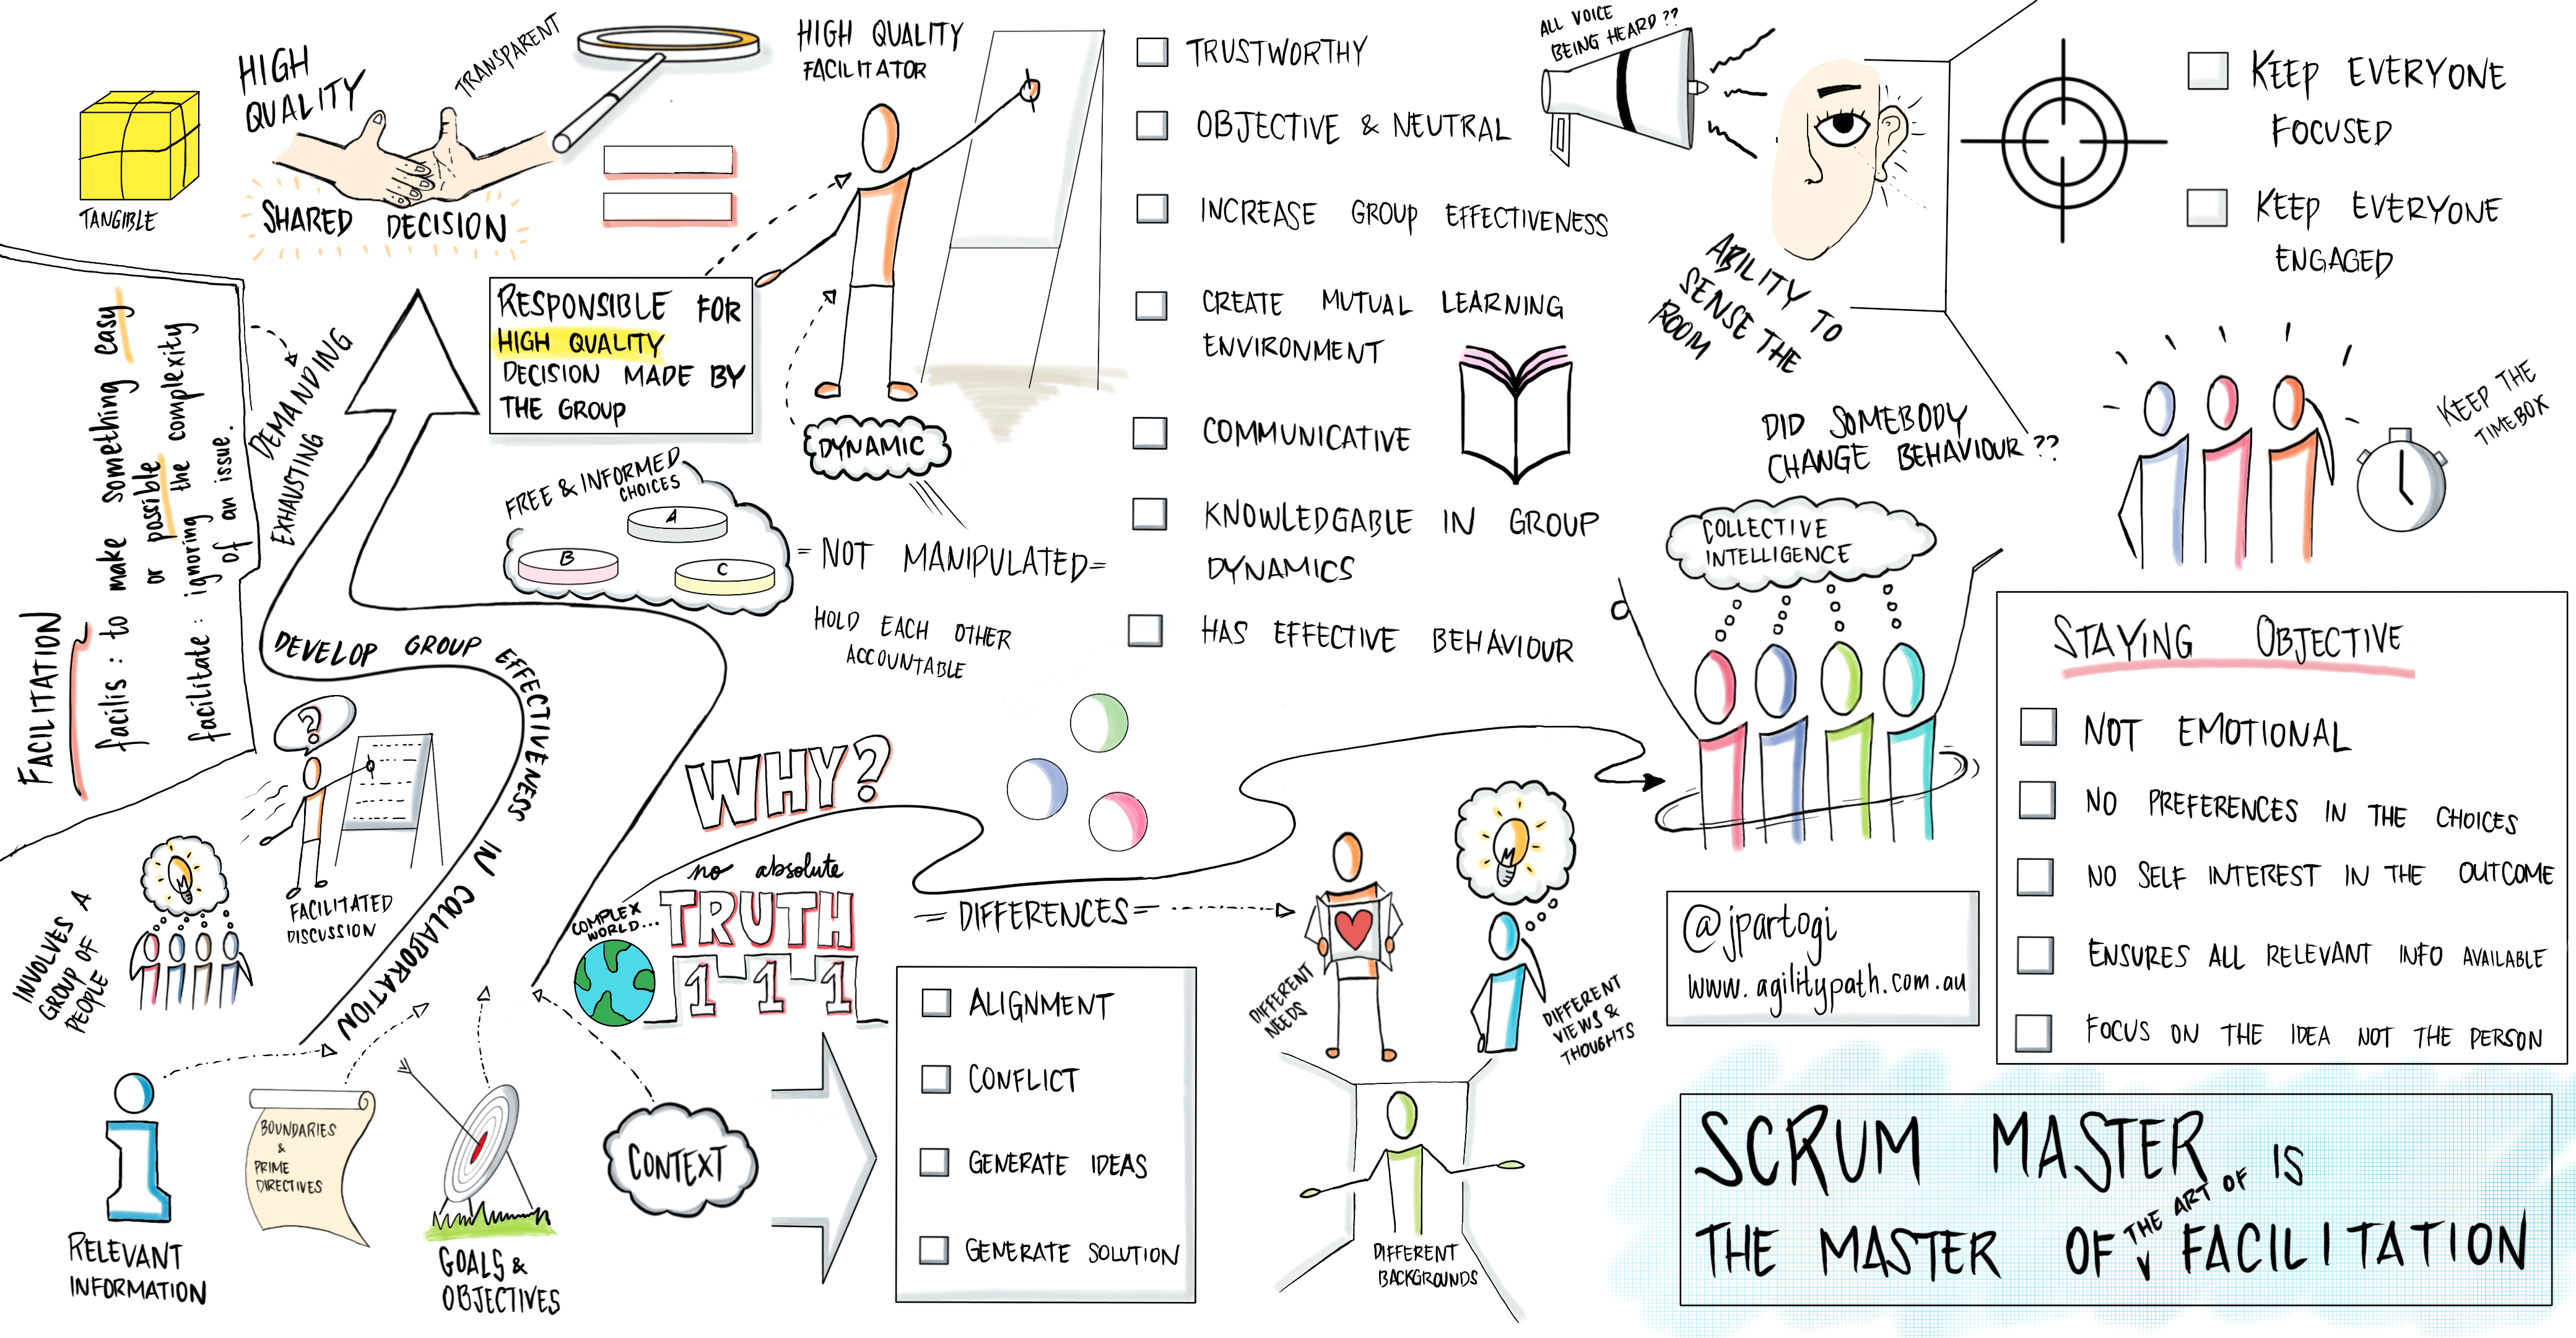 Scrum Master: the master of the art of facilitation